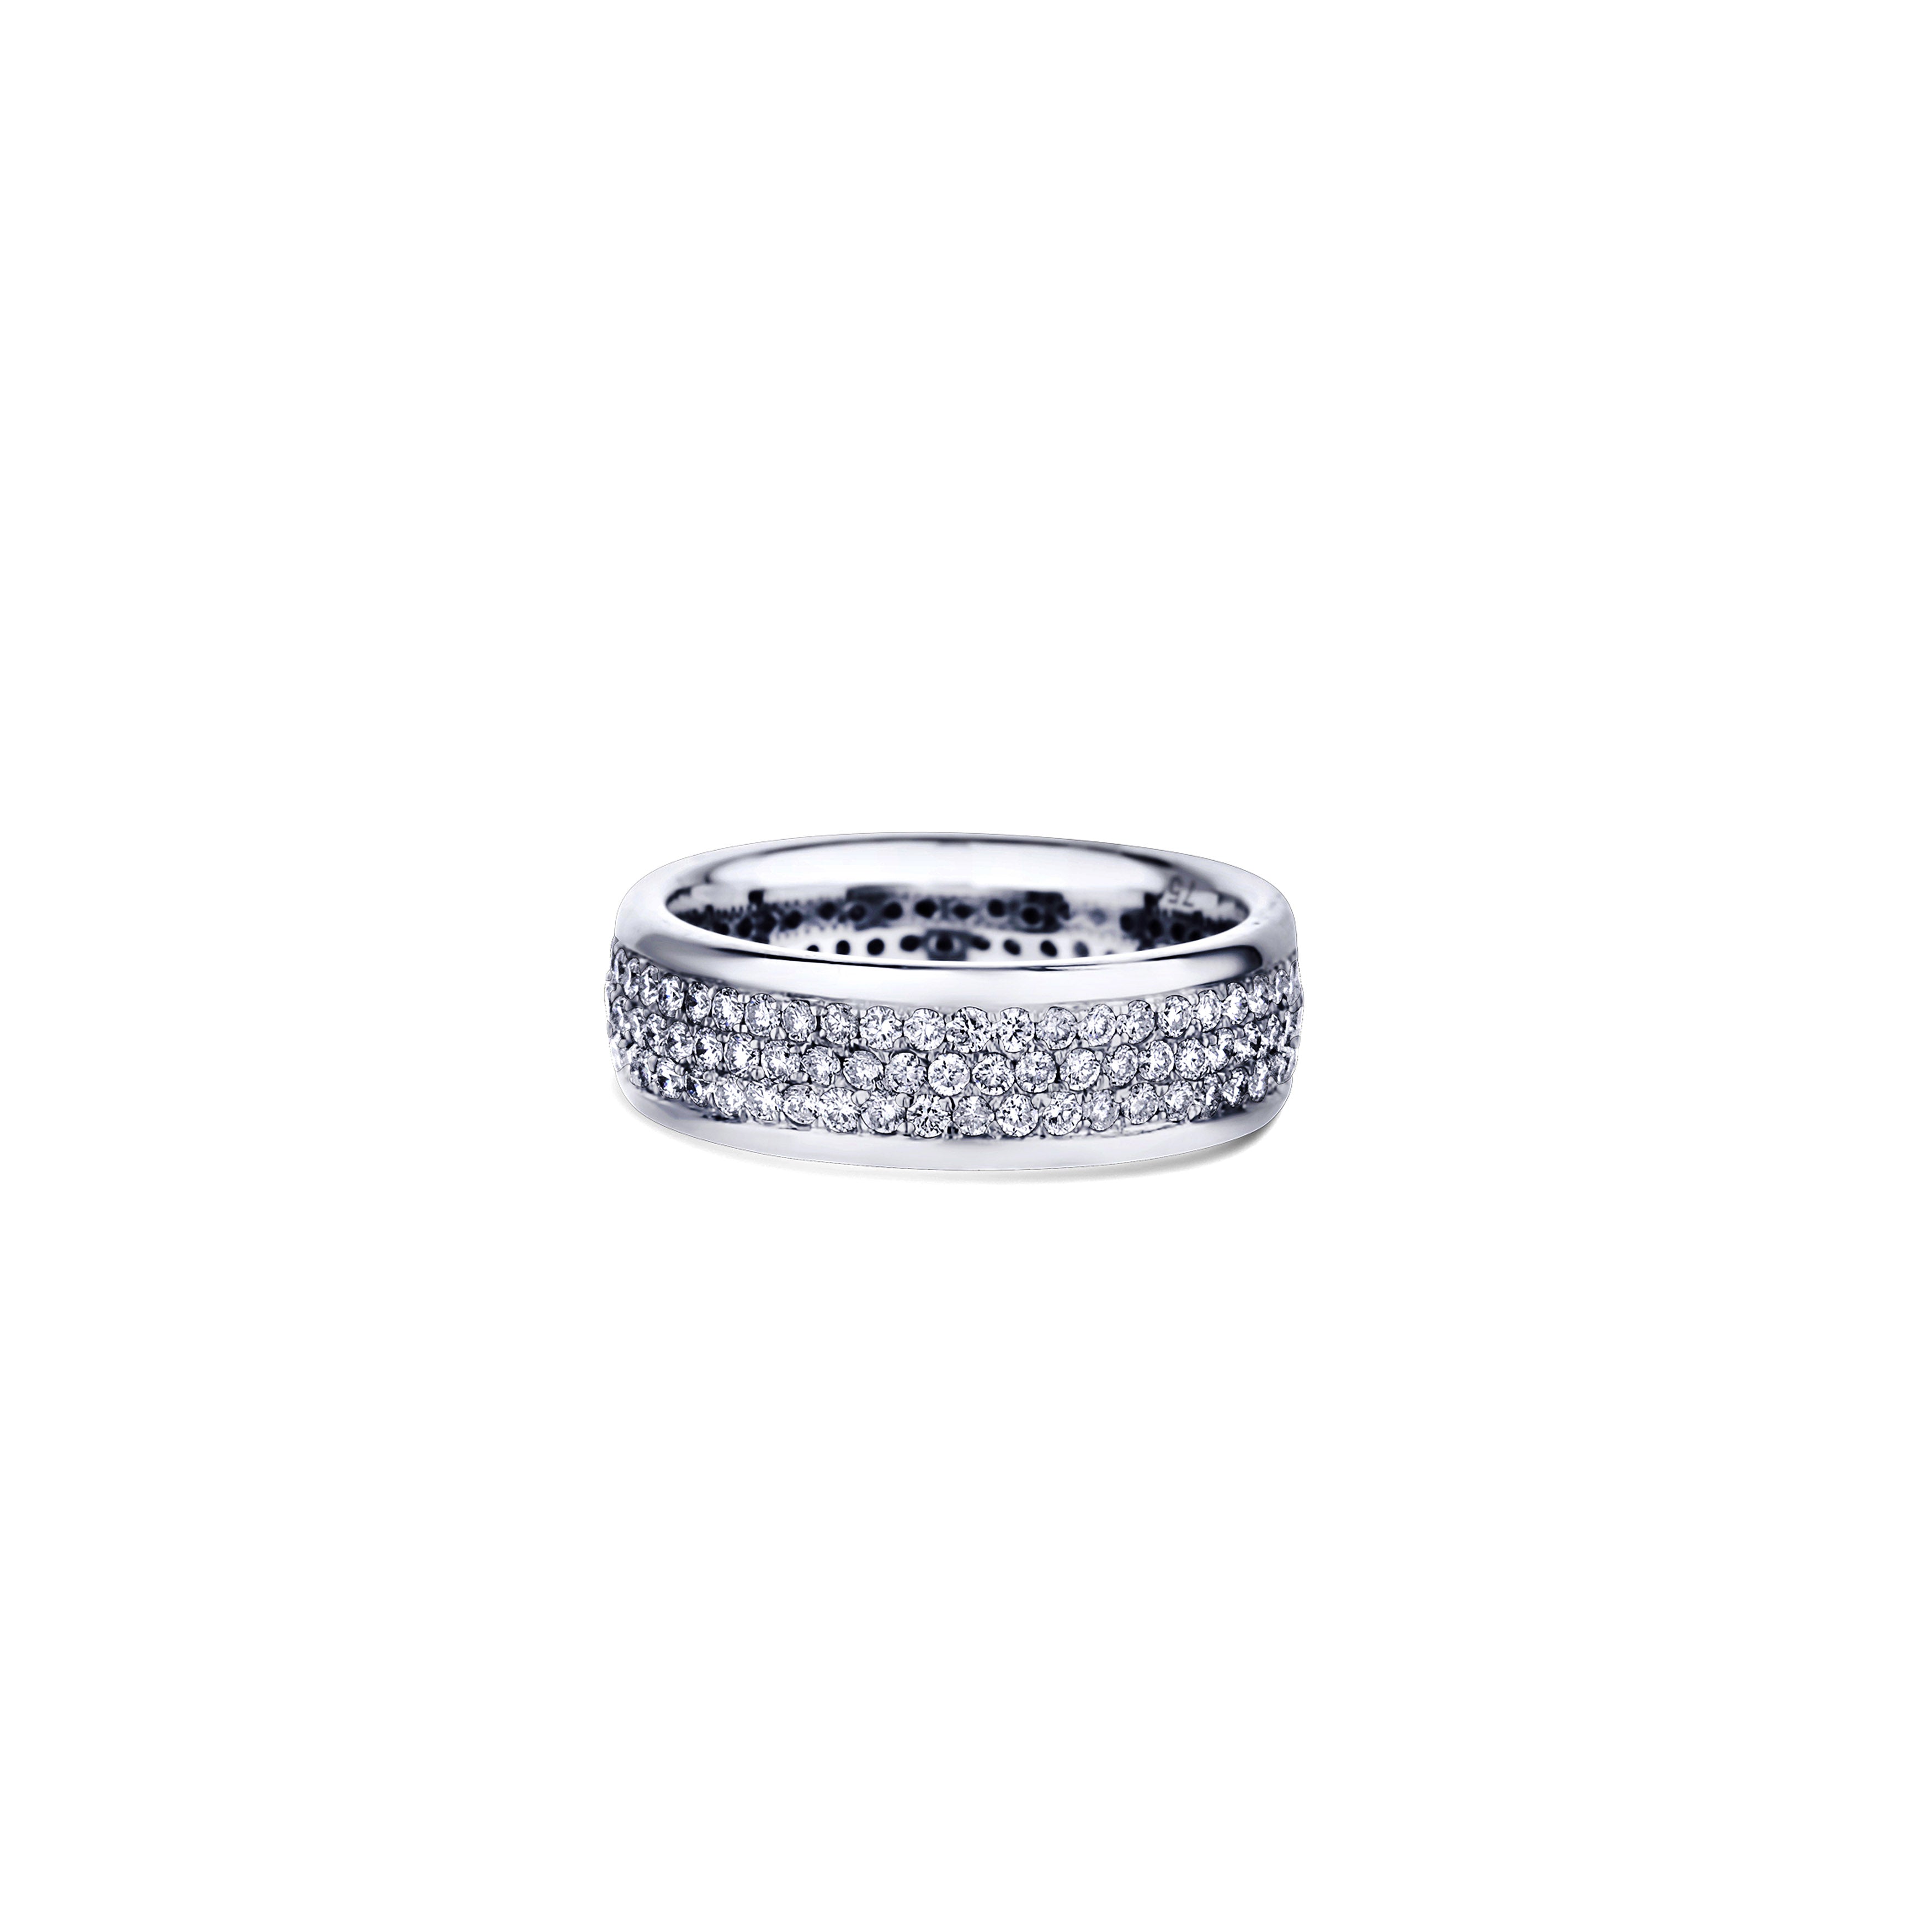 18K White Gold Pave Diamond Eternity Band With Rail Edging